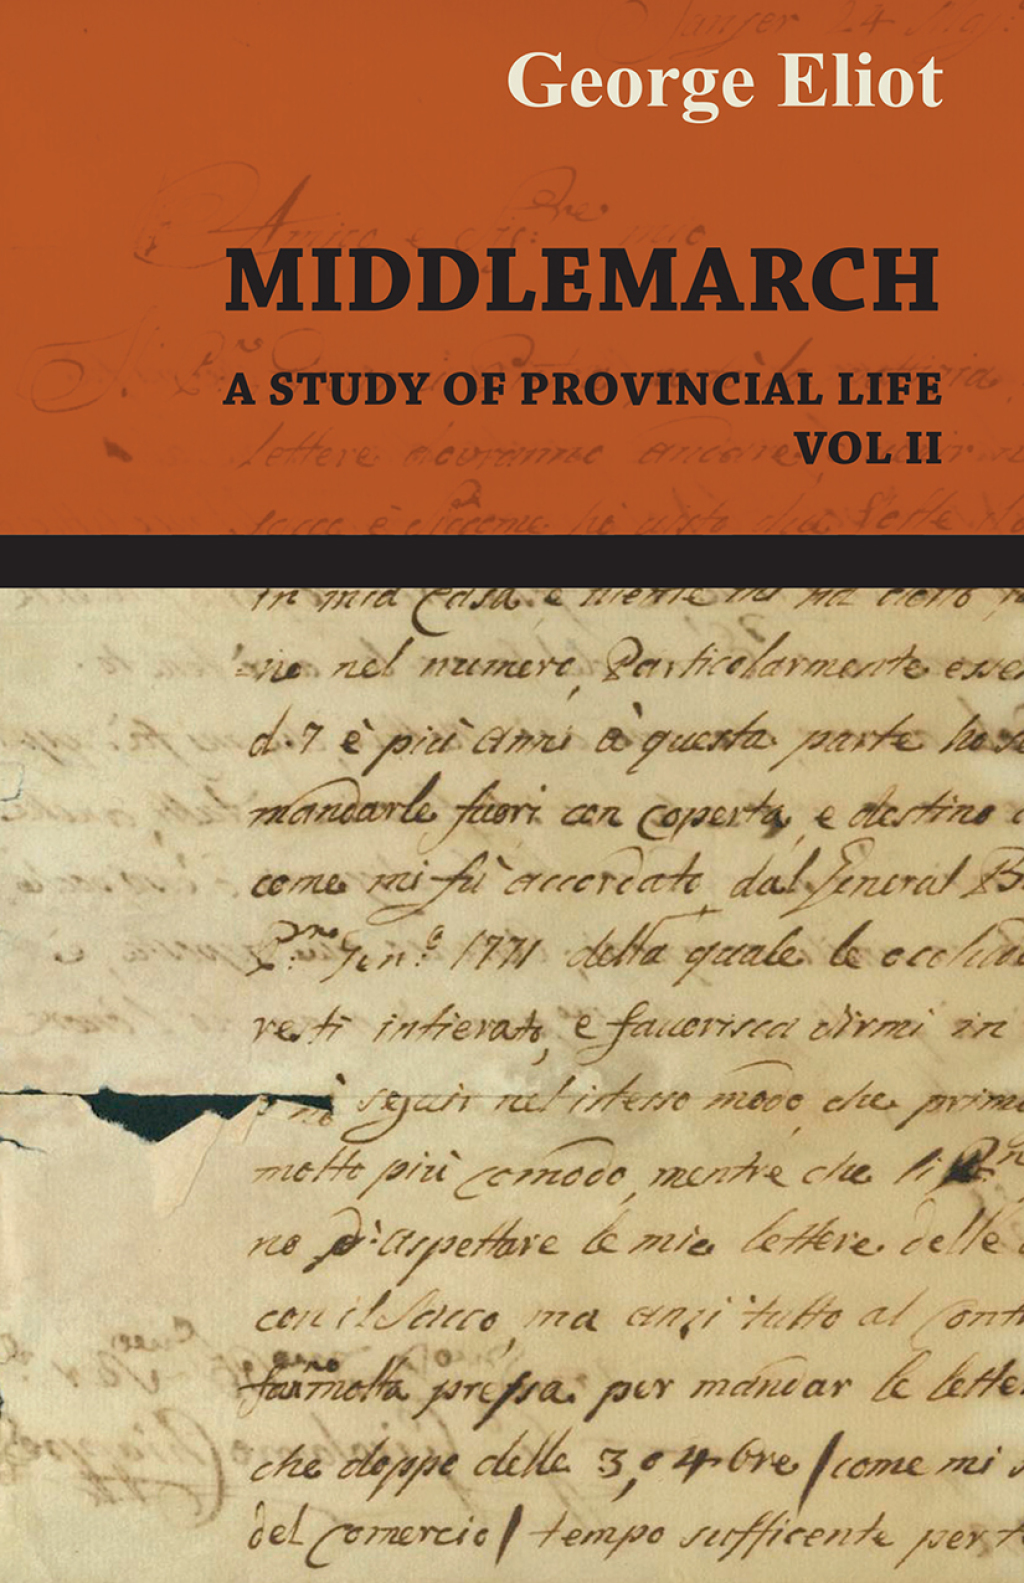 Middlemarch - A Study of Provincial Life - Vol. II (eBook) - George Eliot